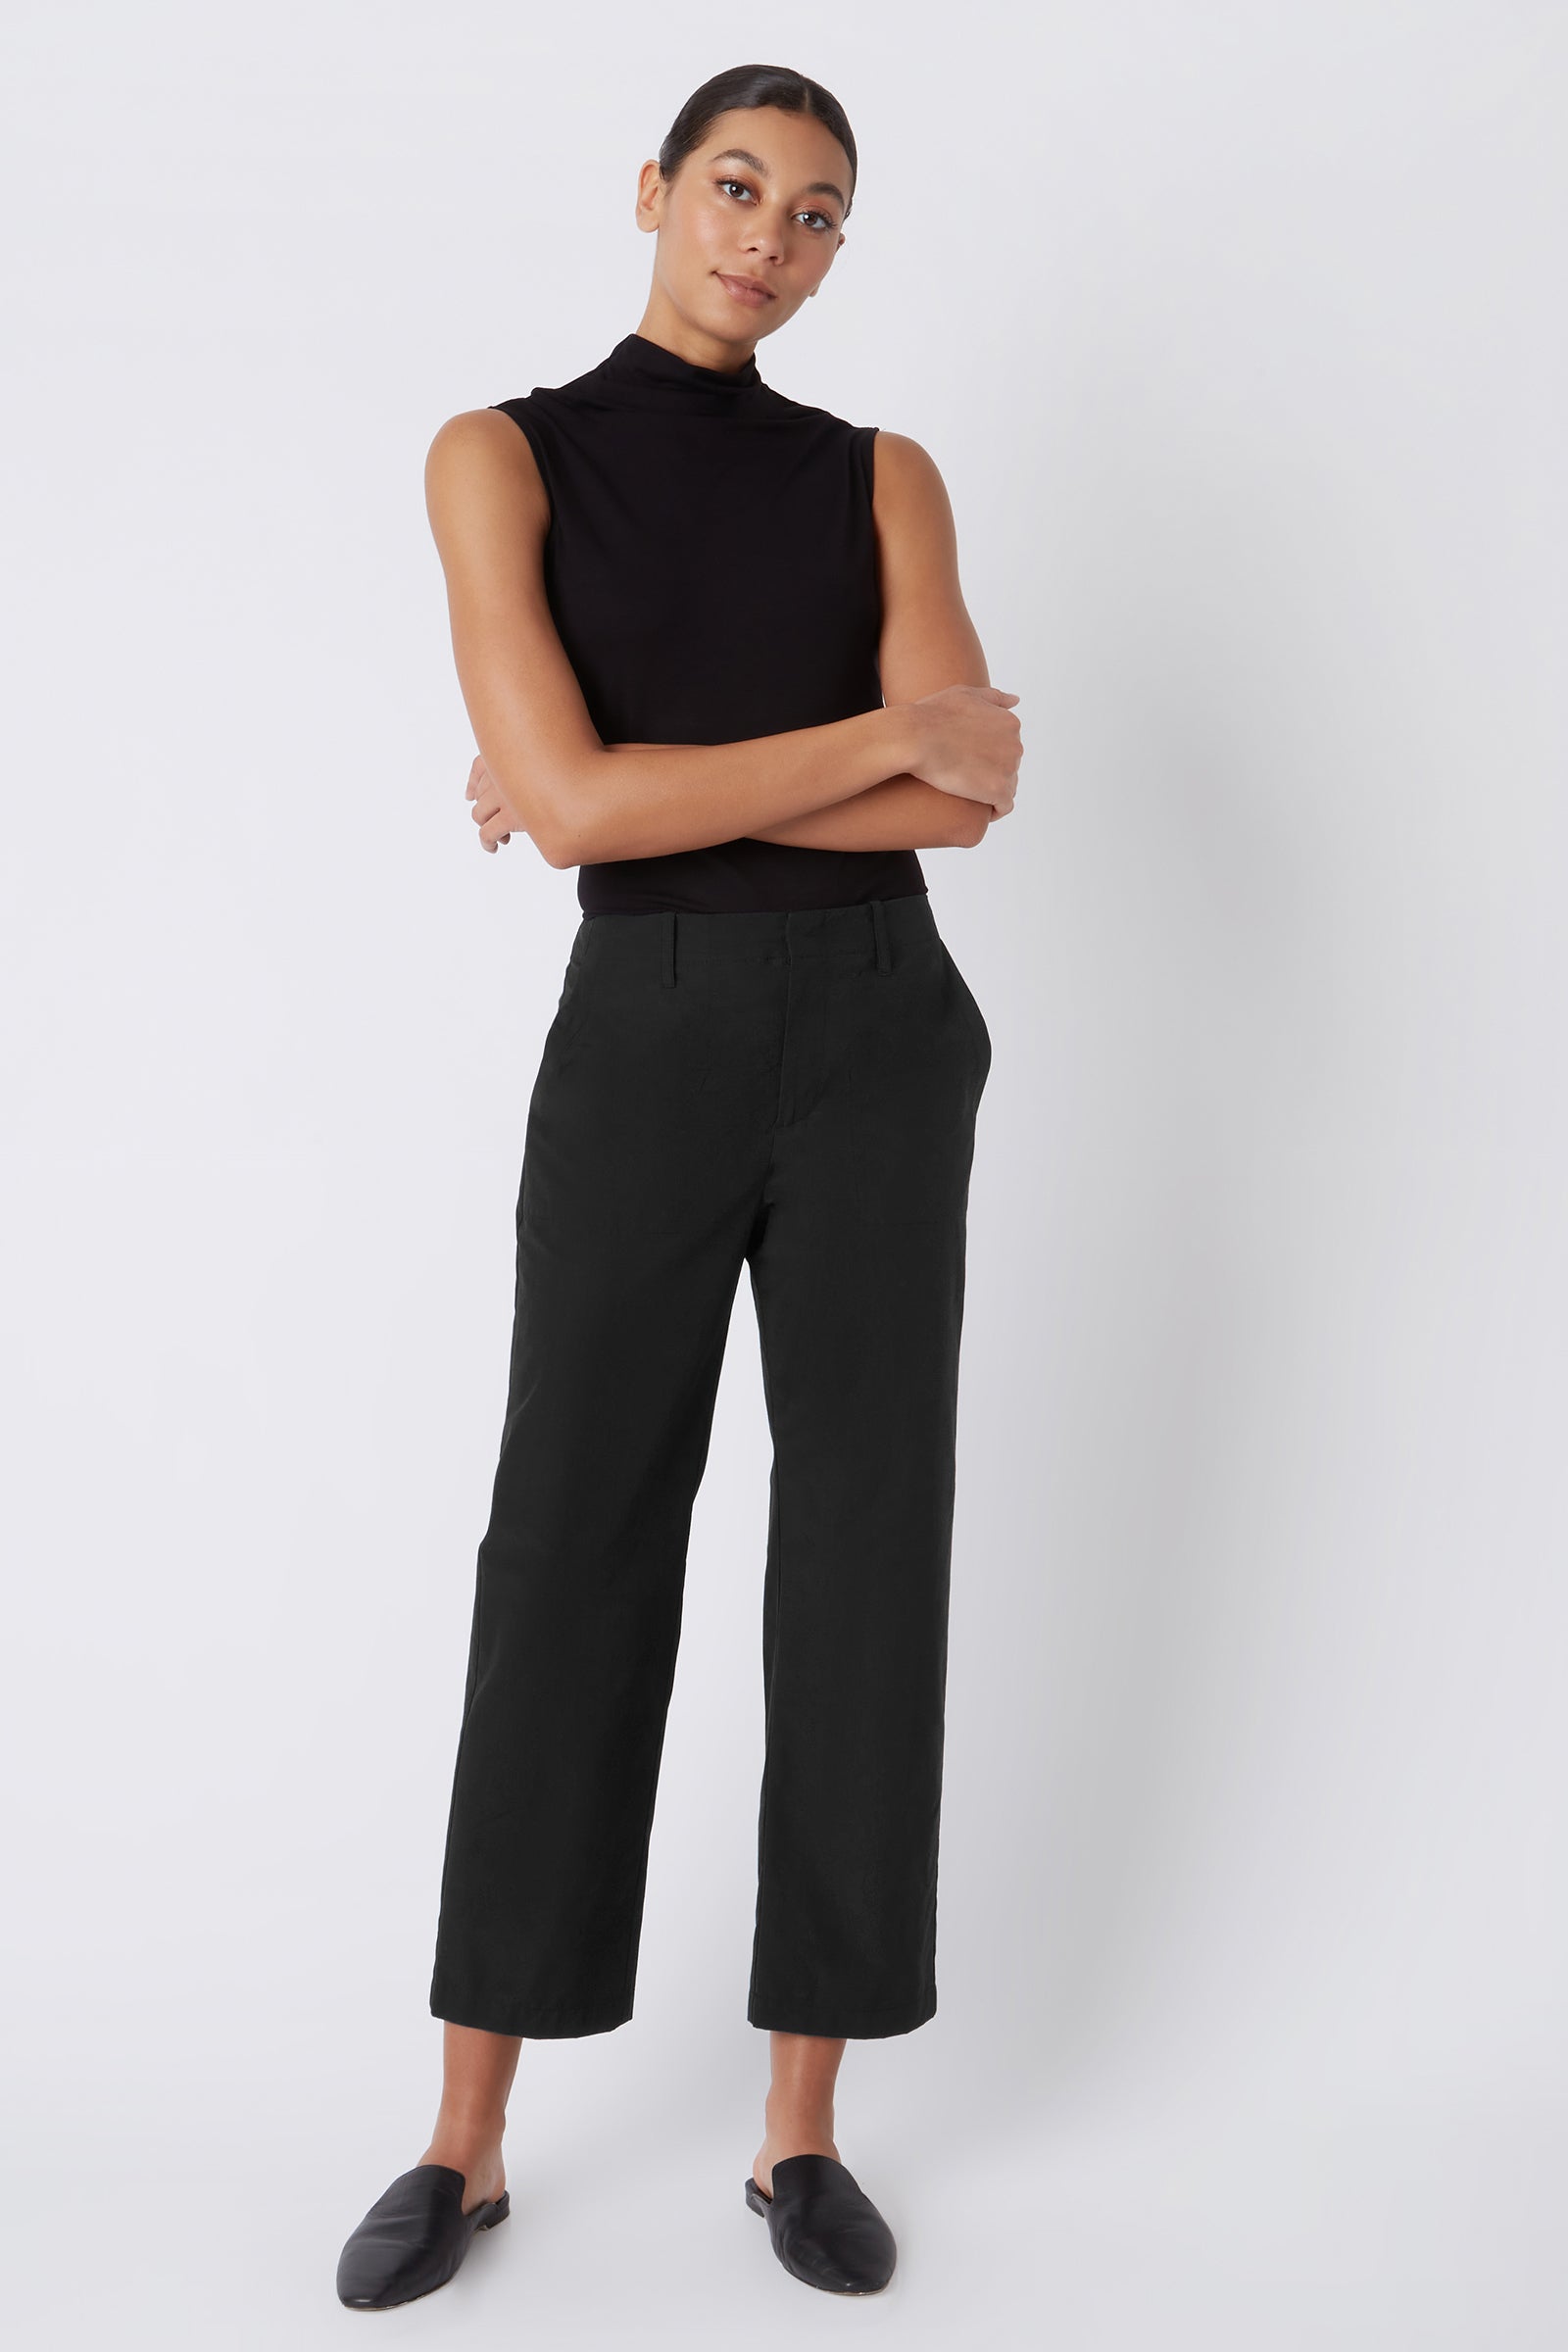 Kal Rieman Brit Crop Pant in Black on Model with Arms Crossed Full Front View